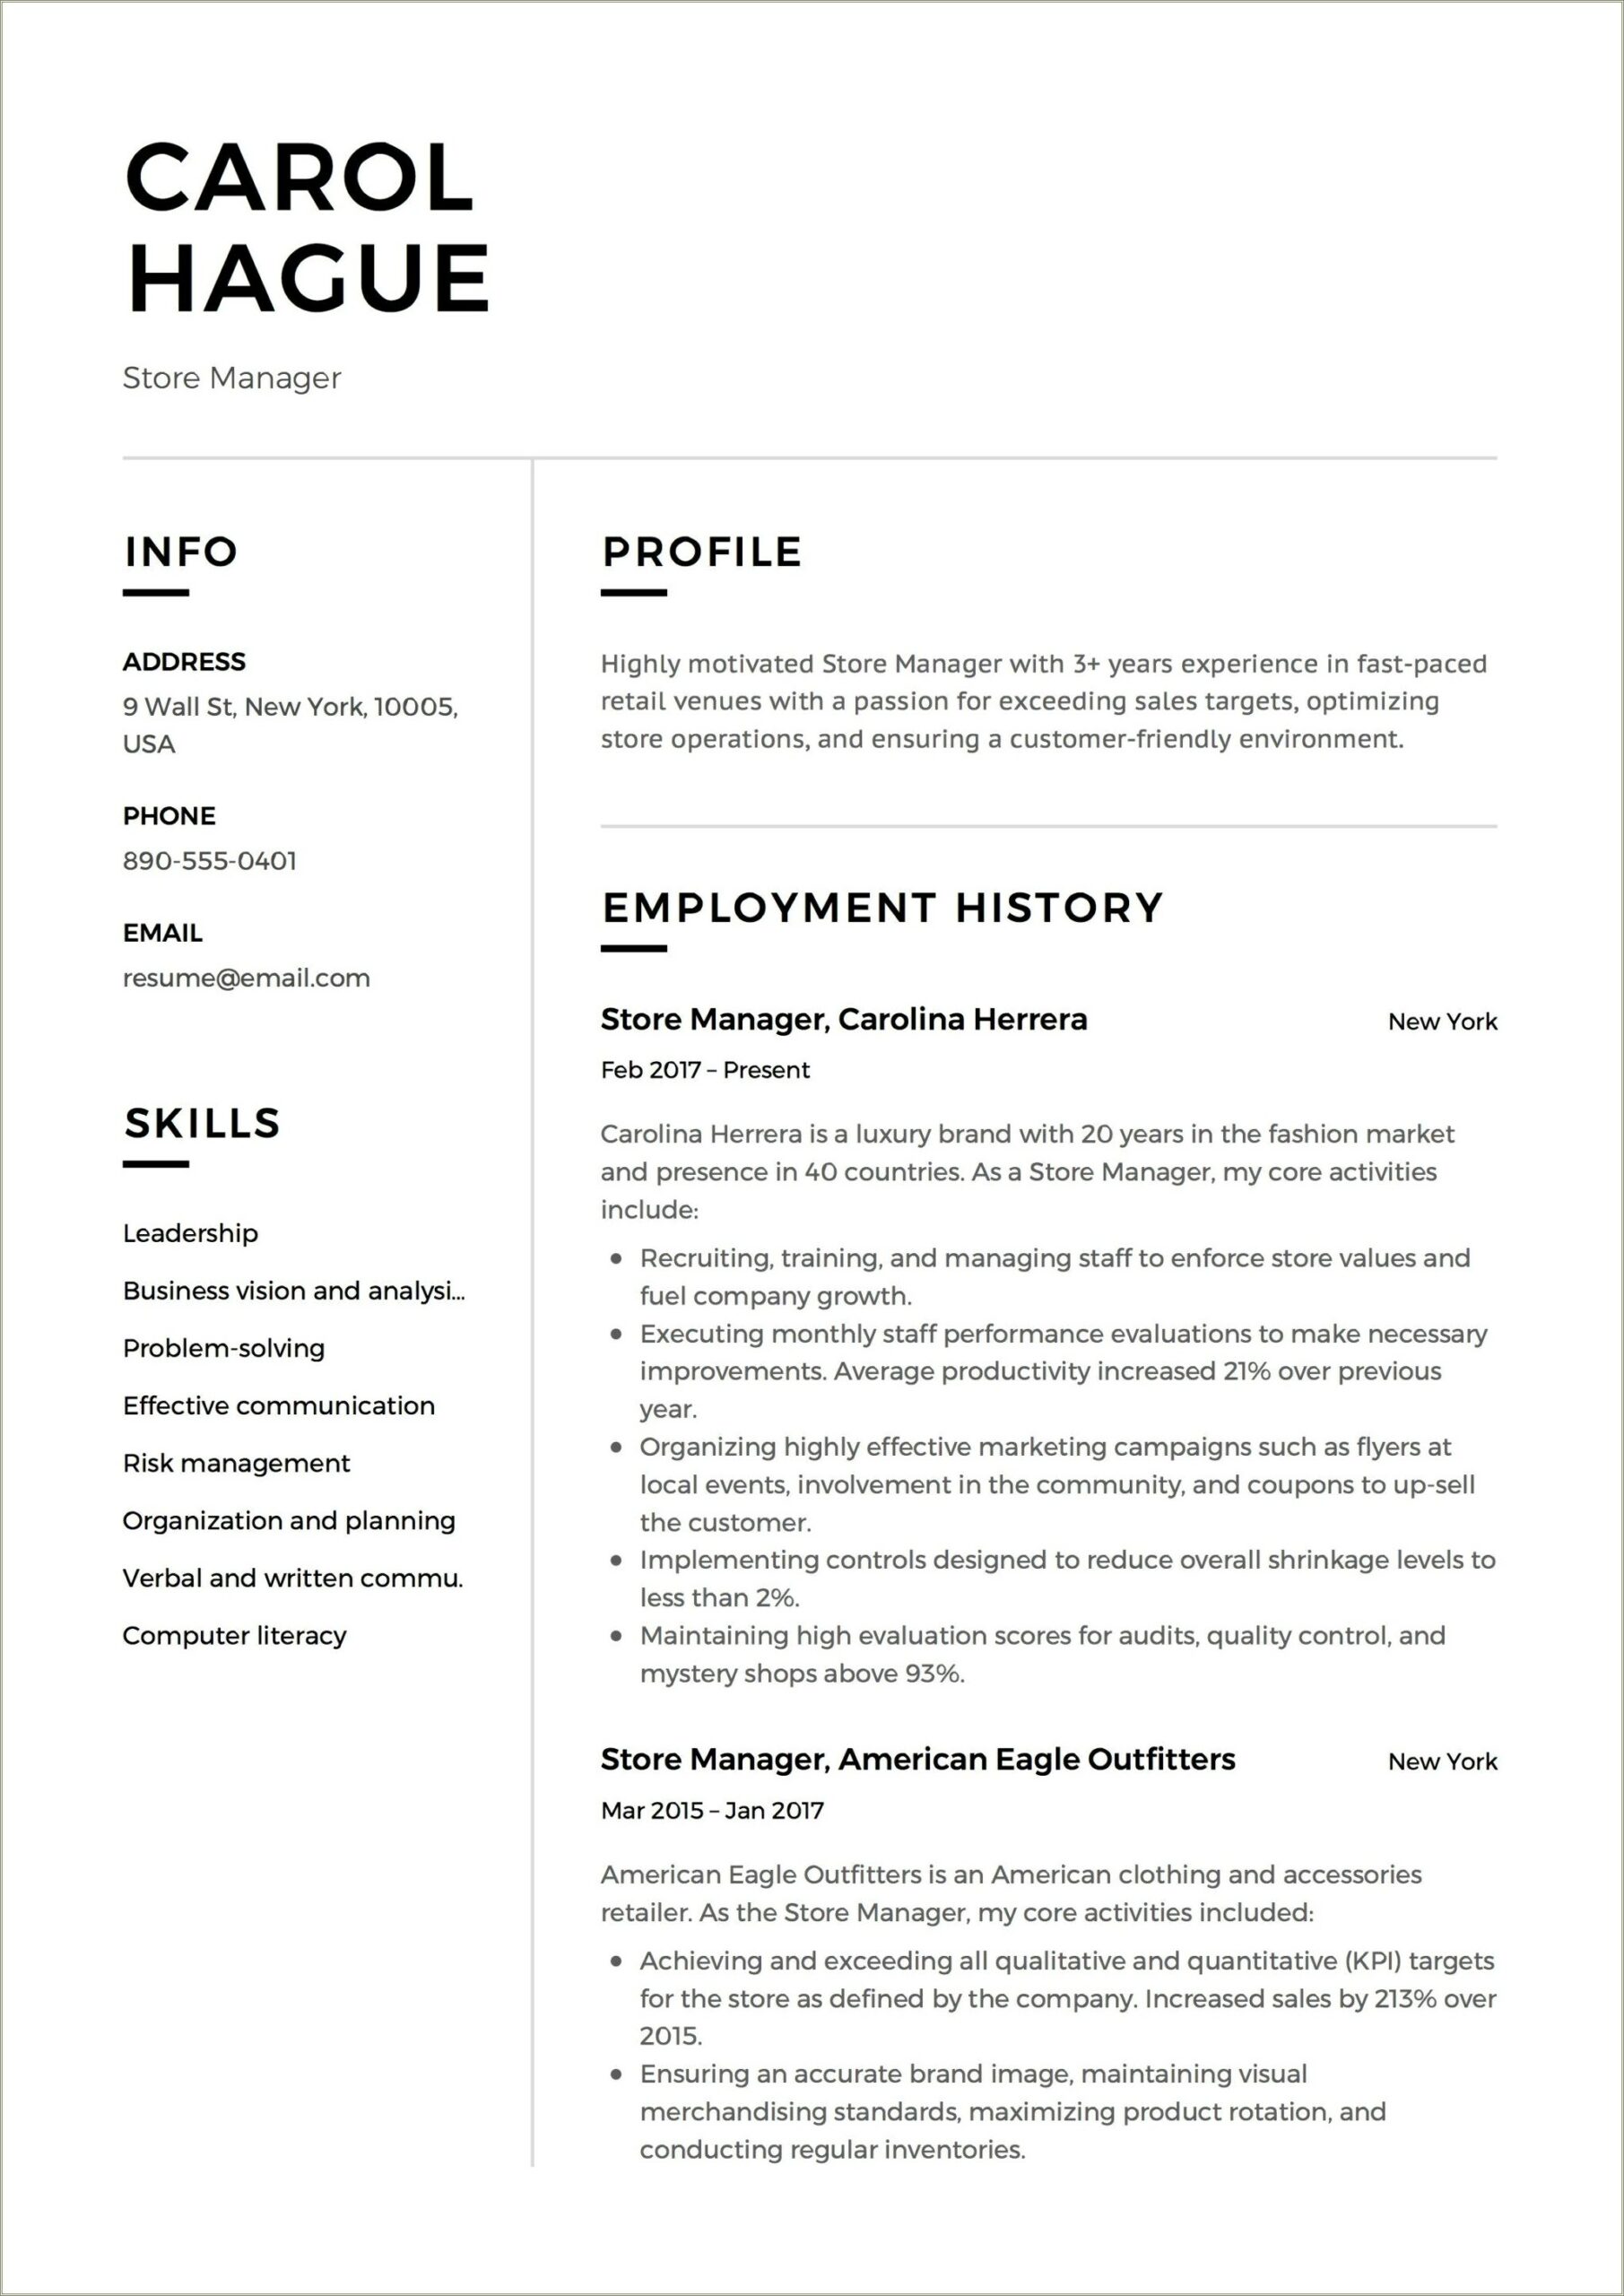 Resume Modern Template For Retail Sales